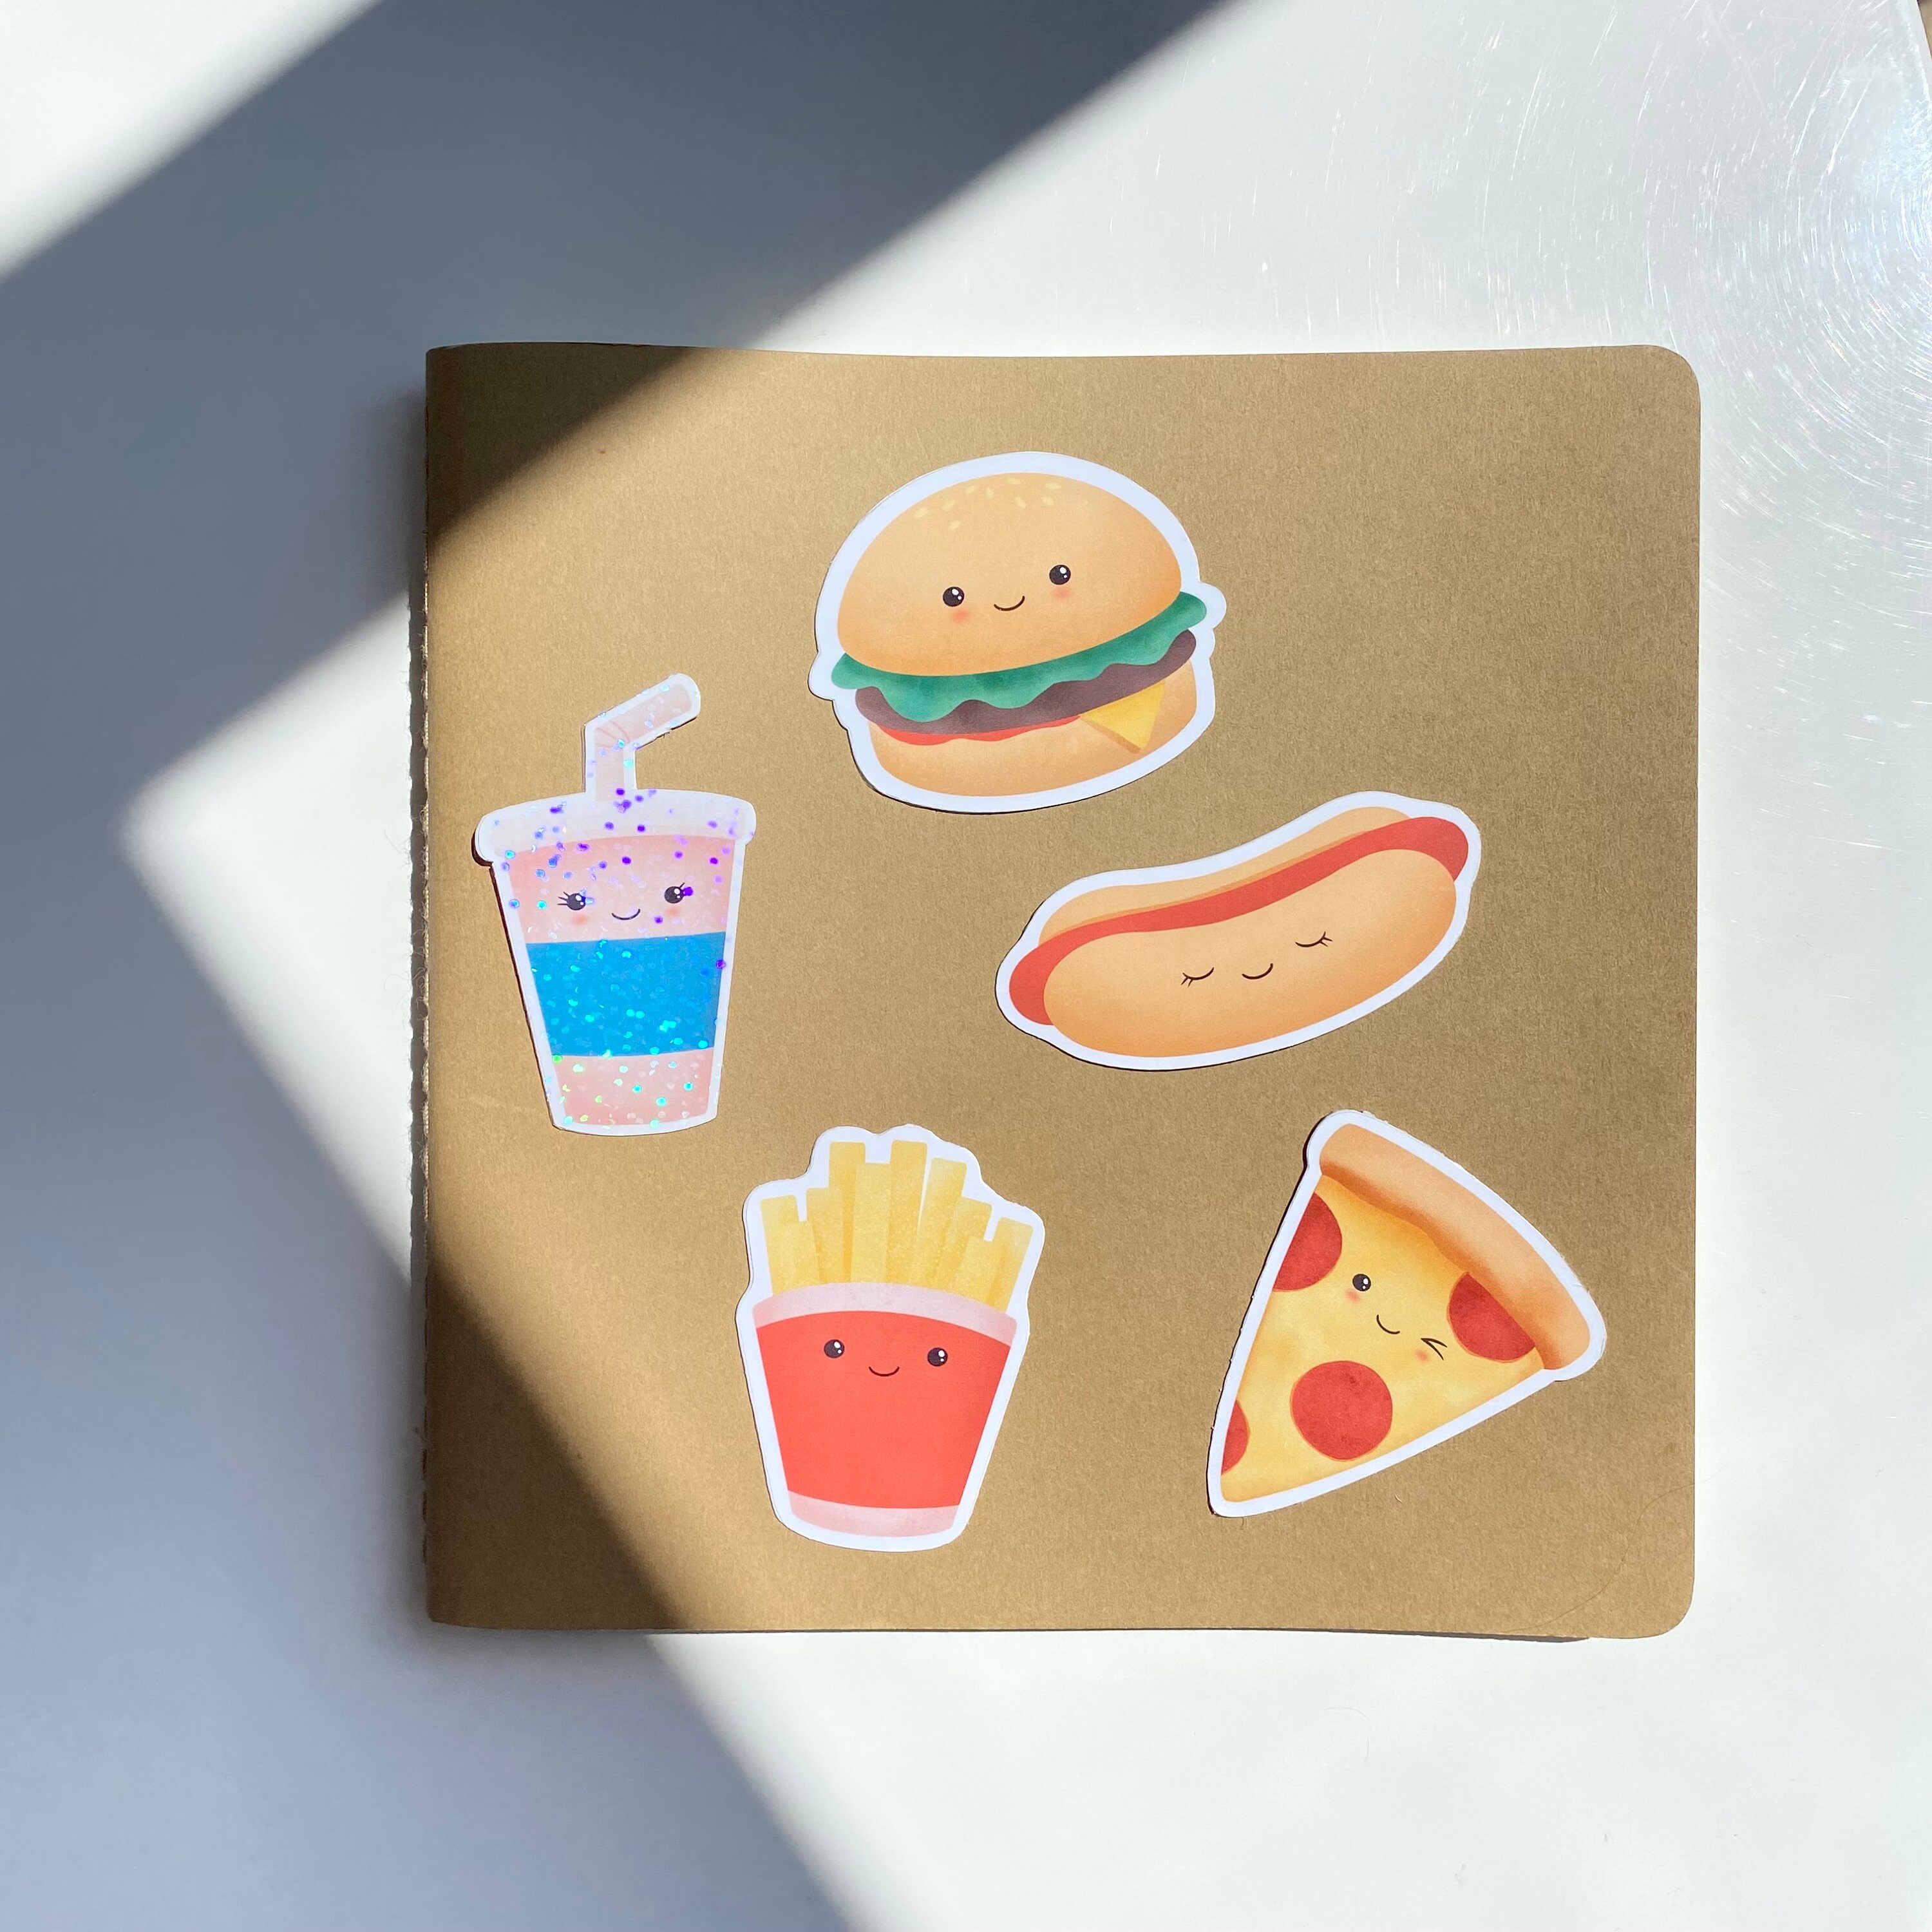 9 Kawaii Food Duo Stickers Perfect Pair Sticker Set Cute Food Sticker  Adorable Food Stickers Sweet Matching Food Stickers 